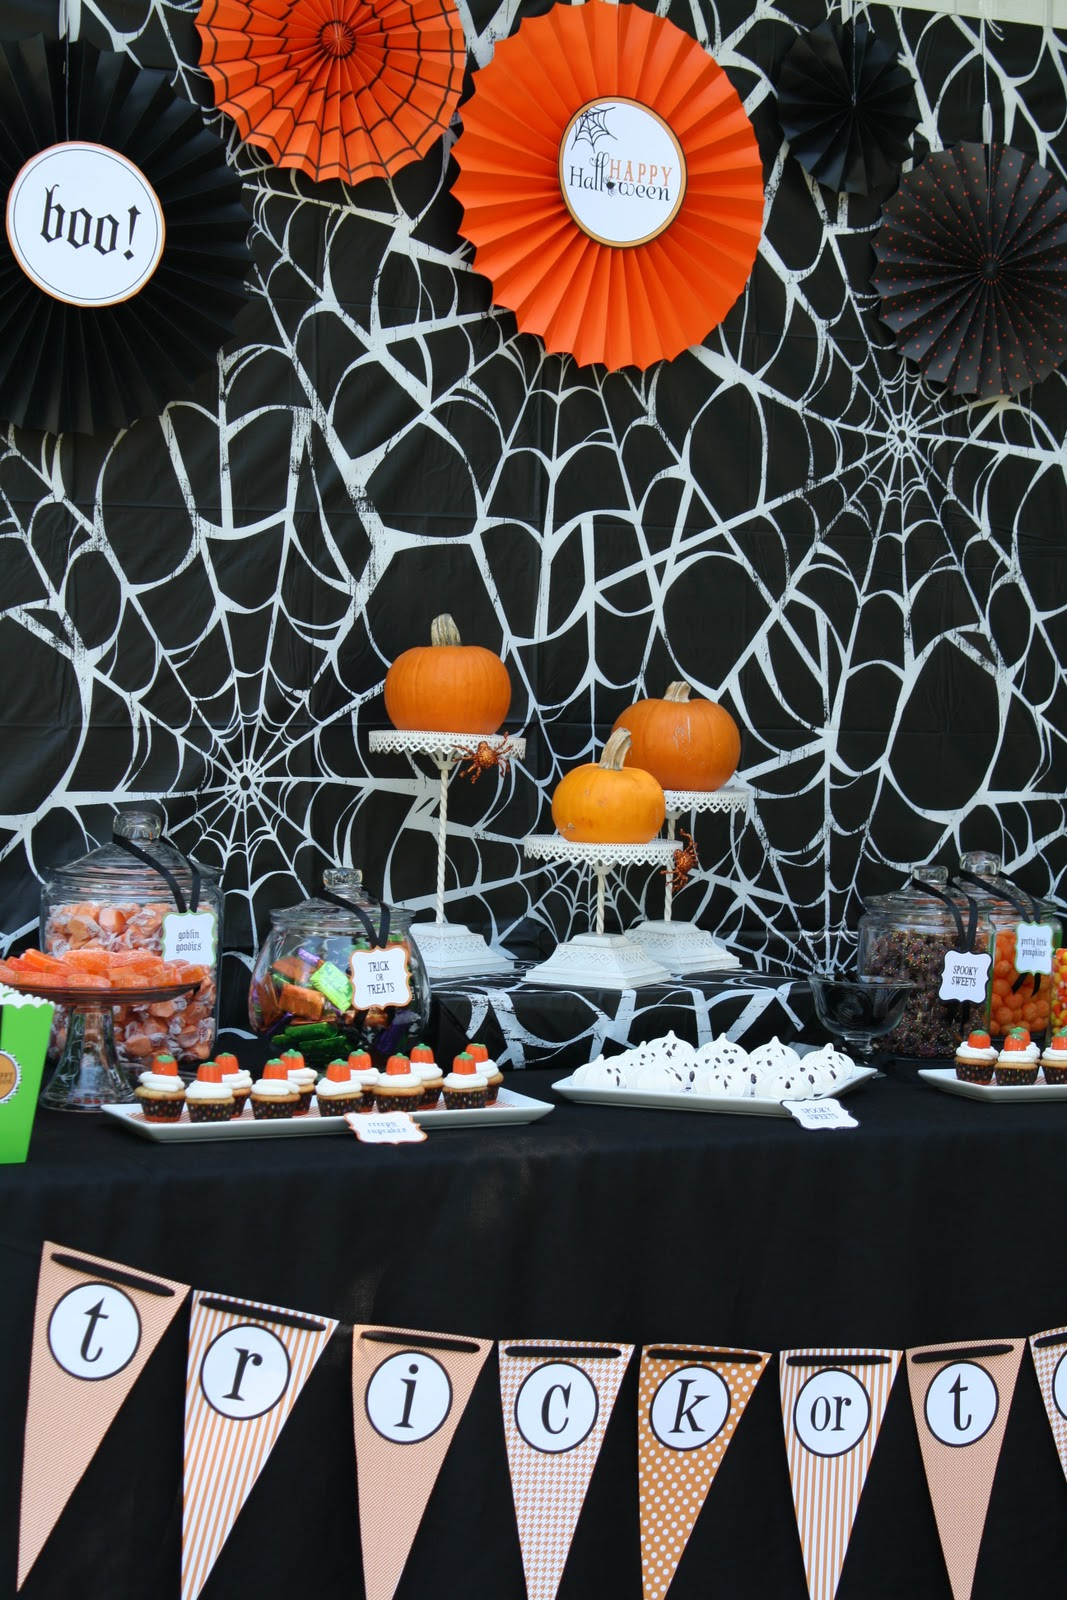 Halloween Birthday Party Decoration Ideas
 A Halloween Pumpkin Carving Party Anders Ruff Custom